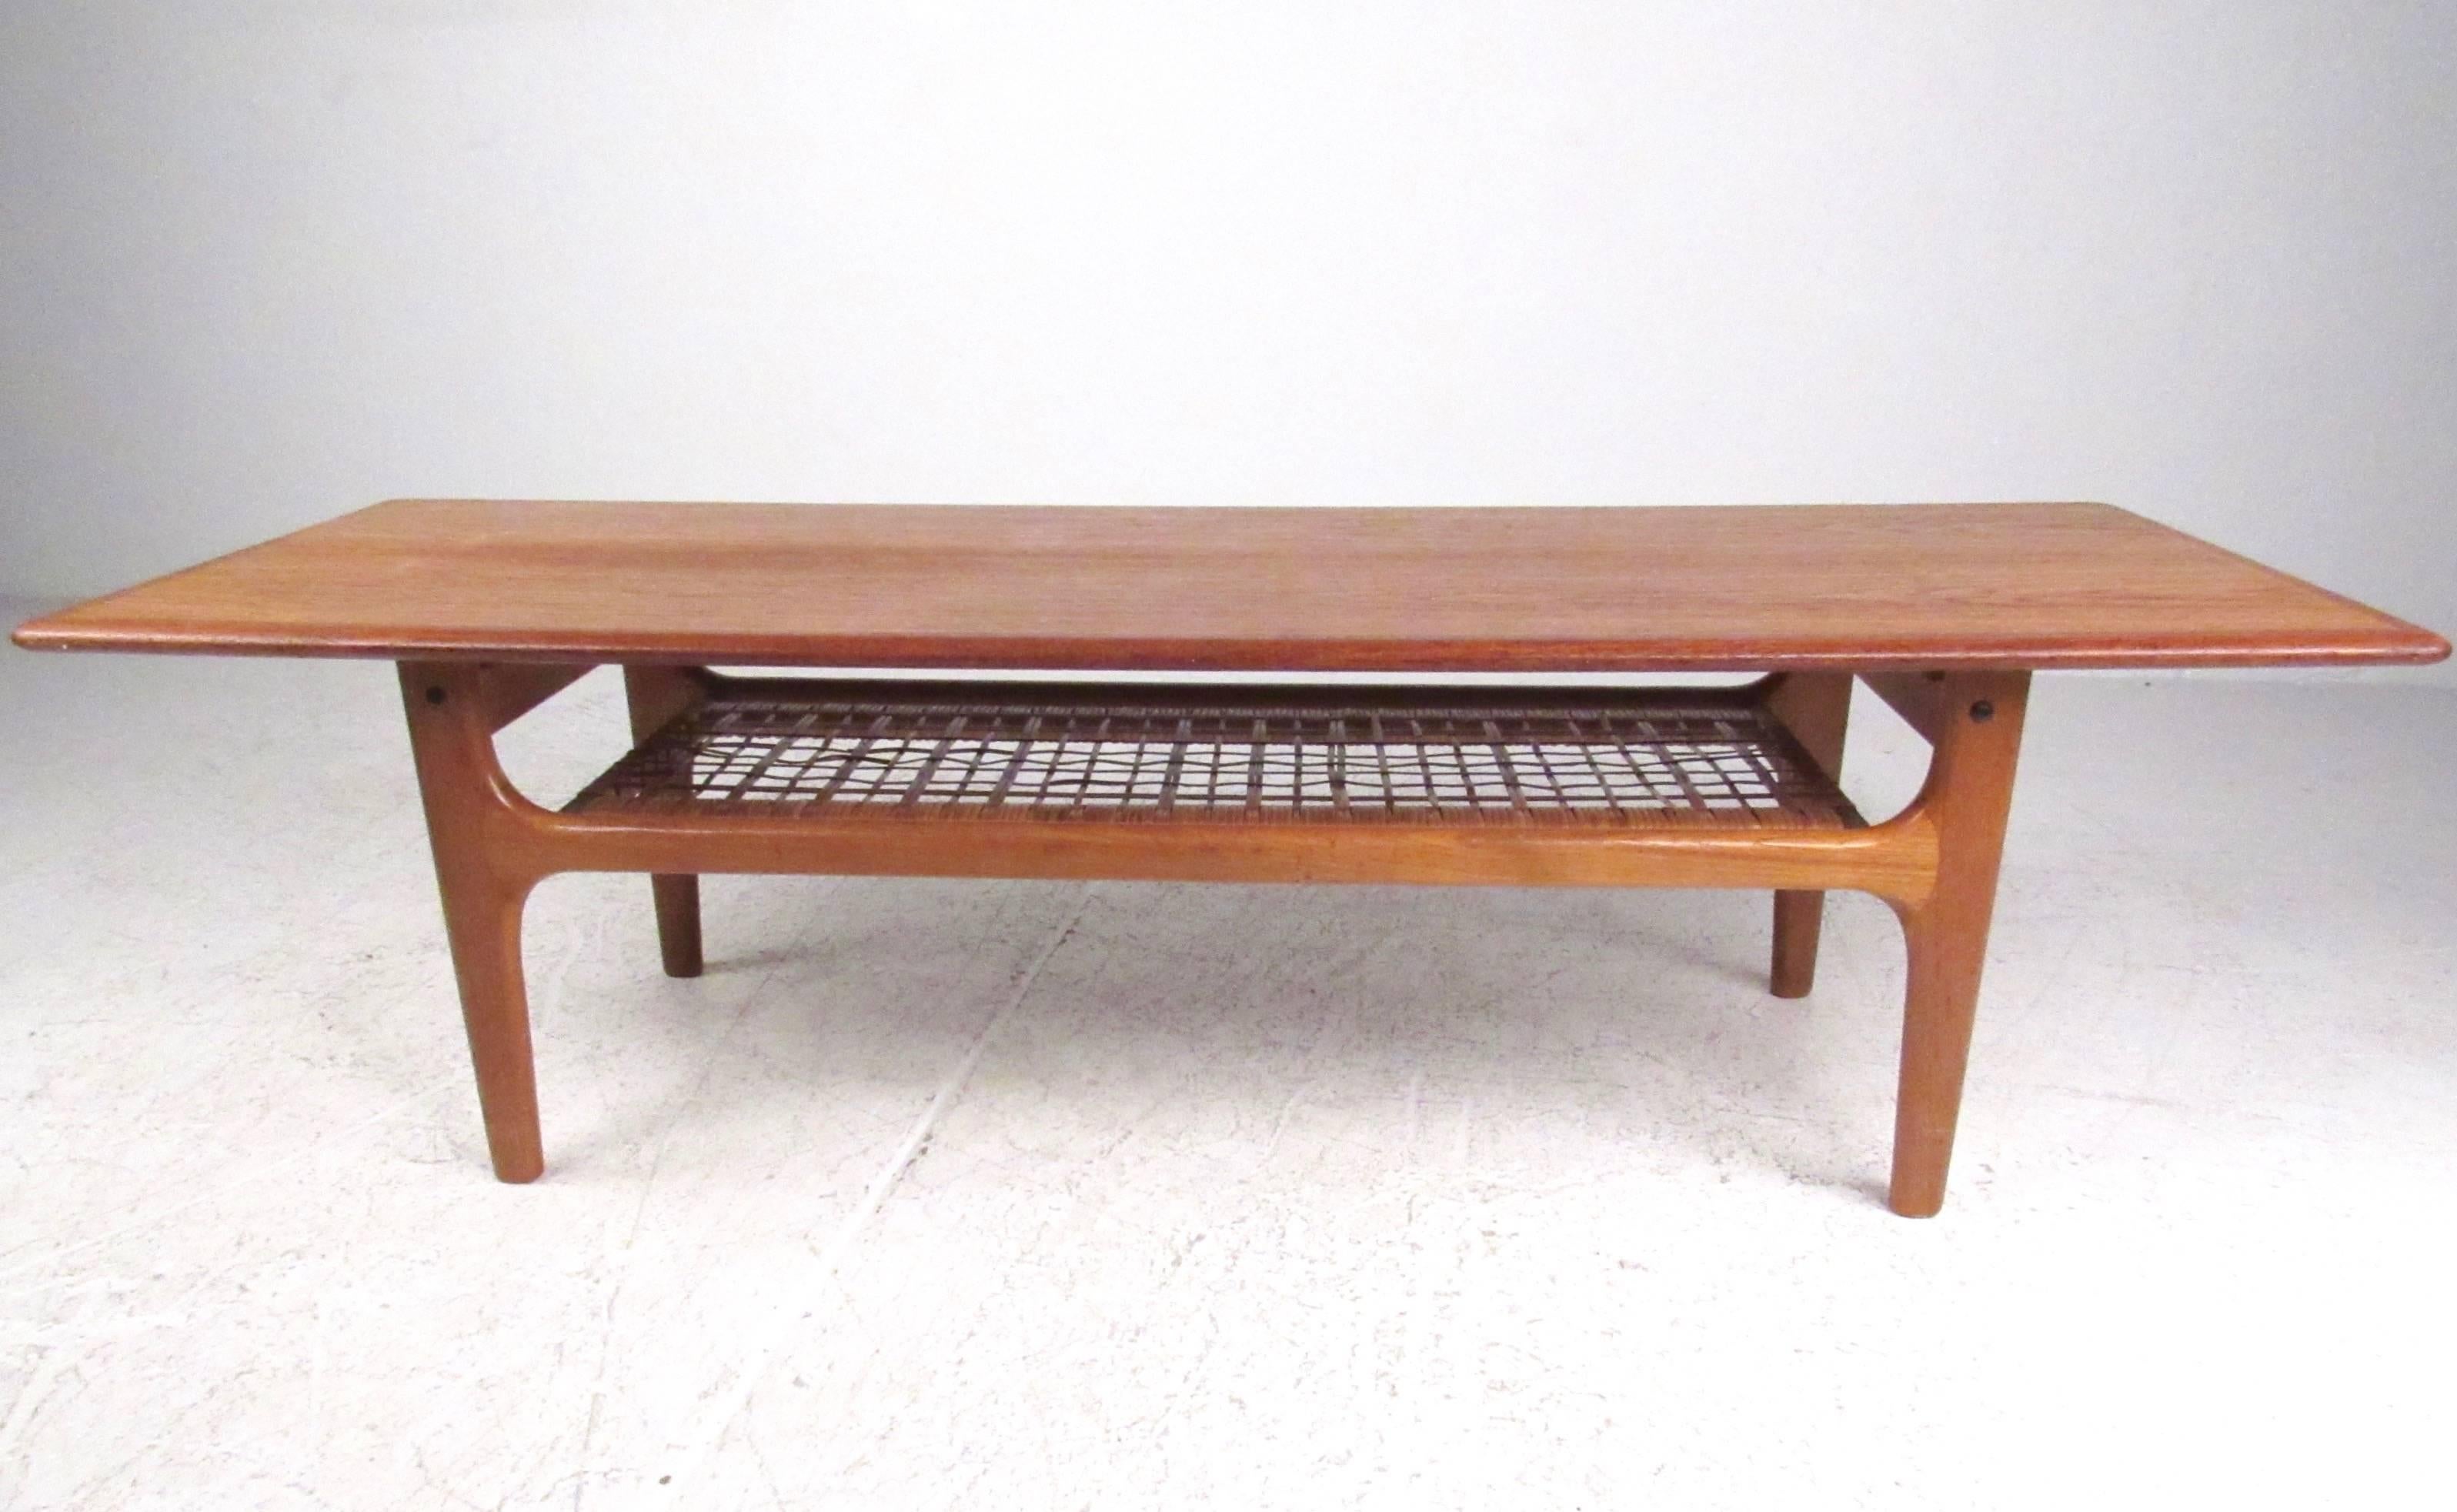 This Danish modern teak coffee table features quality Scandinavian construction with a second cane tier for added storage. This stylish vintage table is perfect for home or business use, and makes a wonderful cocktail table in any setting.